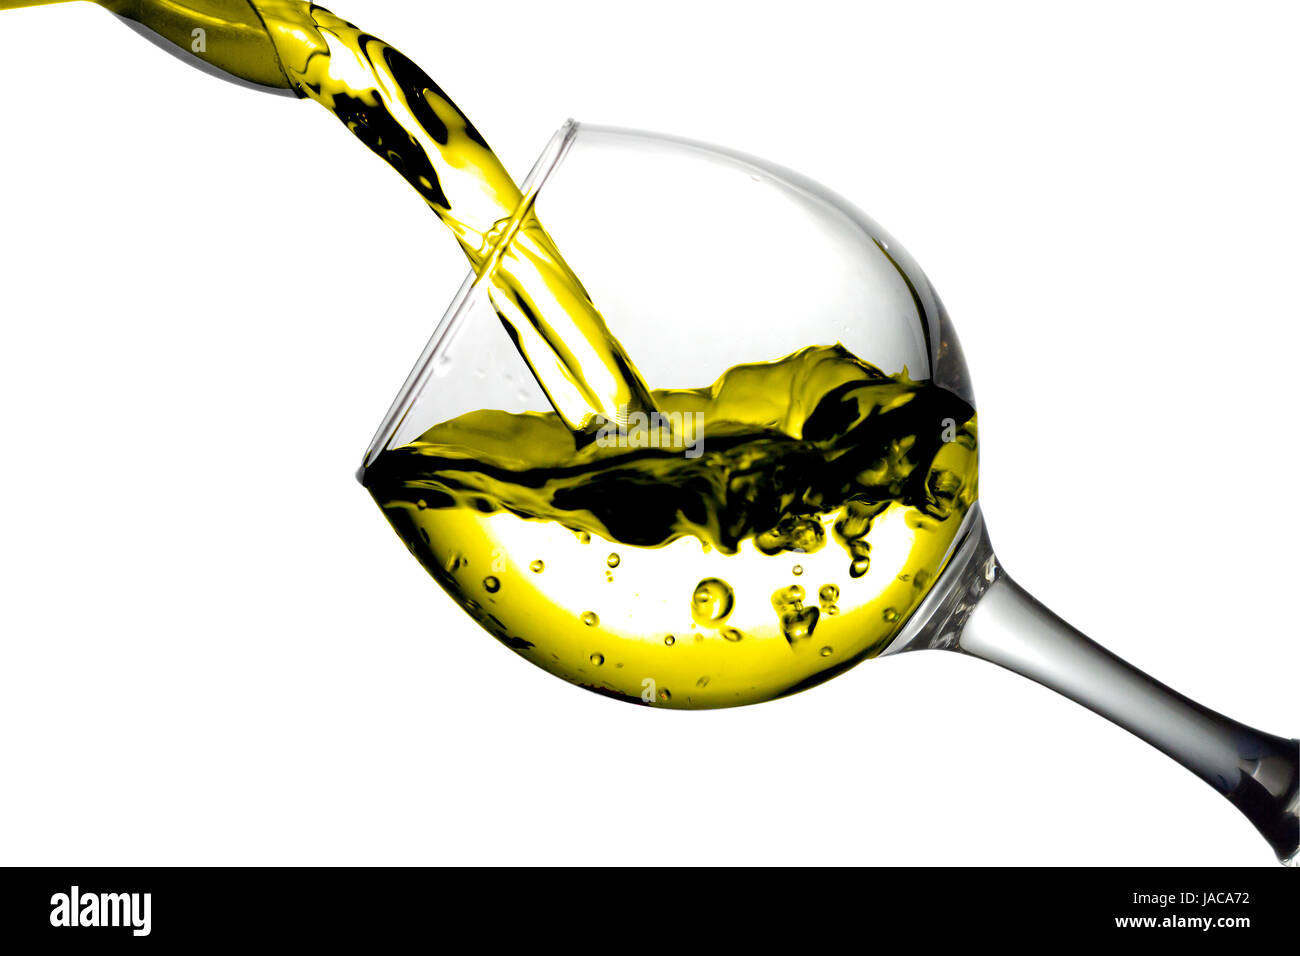 Yellow liquid, water, apple juice, white wine pouring into a glass, liquid in a speaker, isolated on a white background Stock Photo